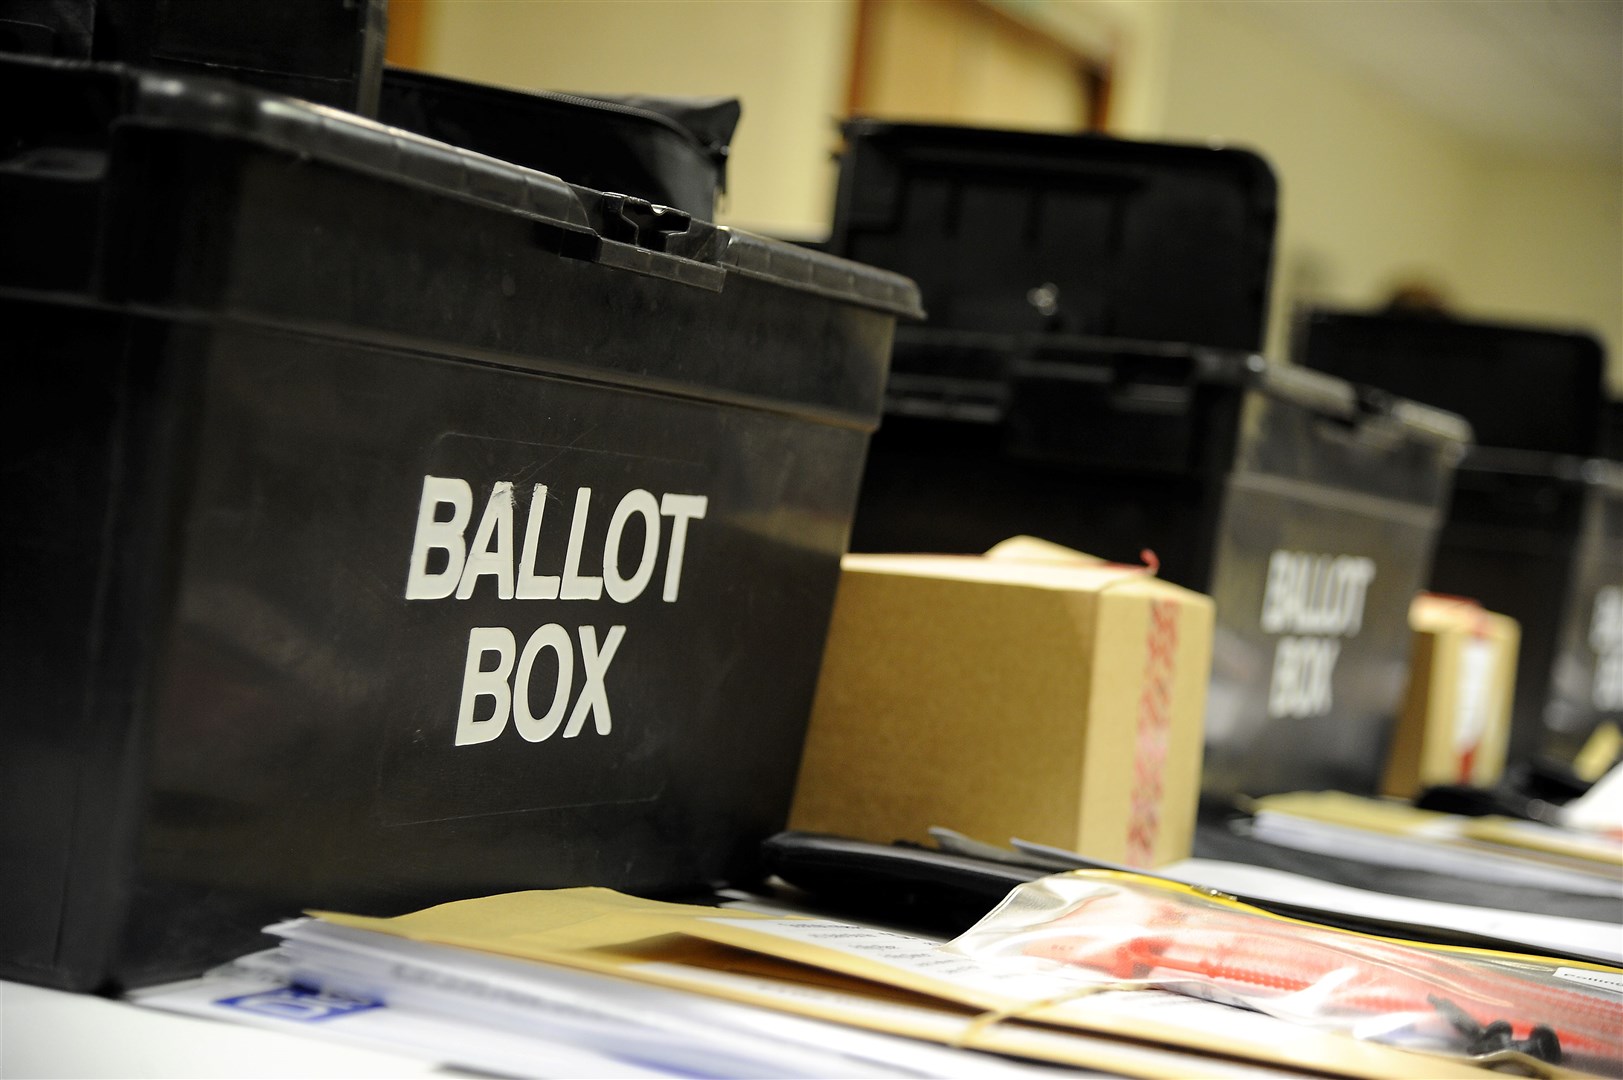 People can vote either in person, by proxy or by mail.